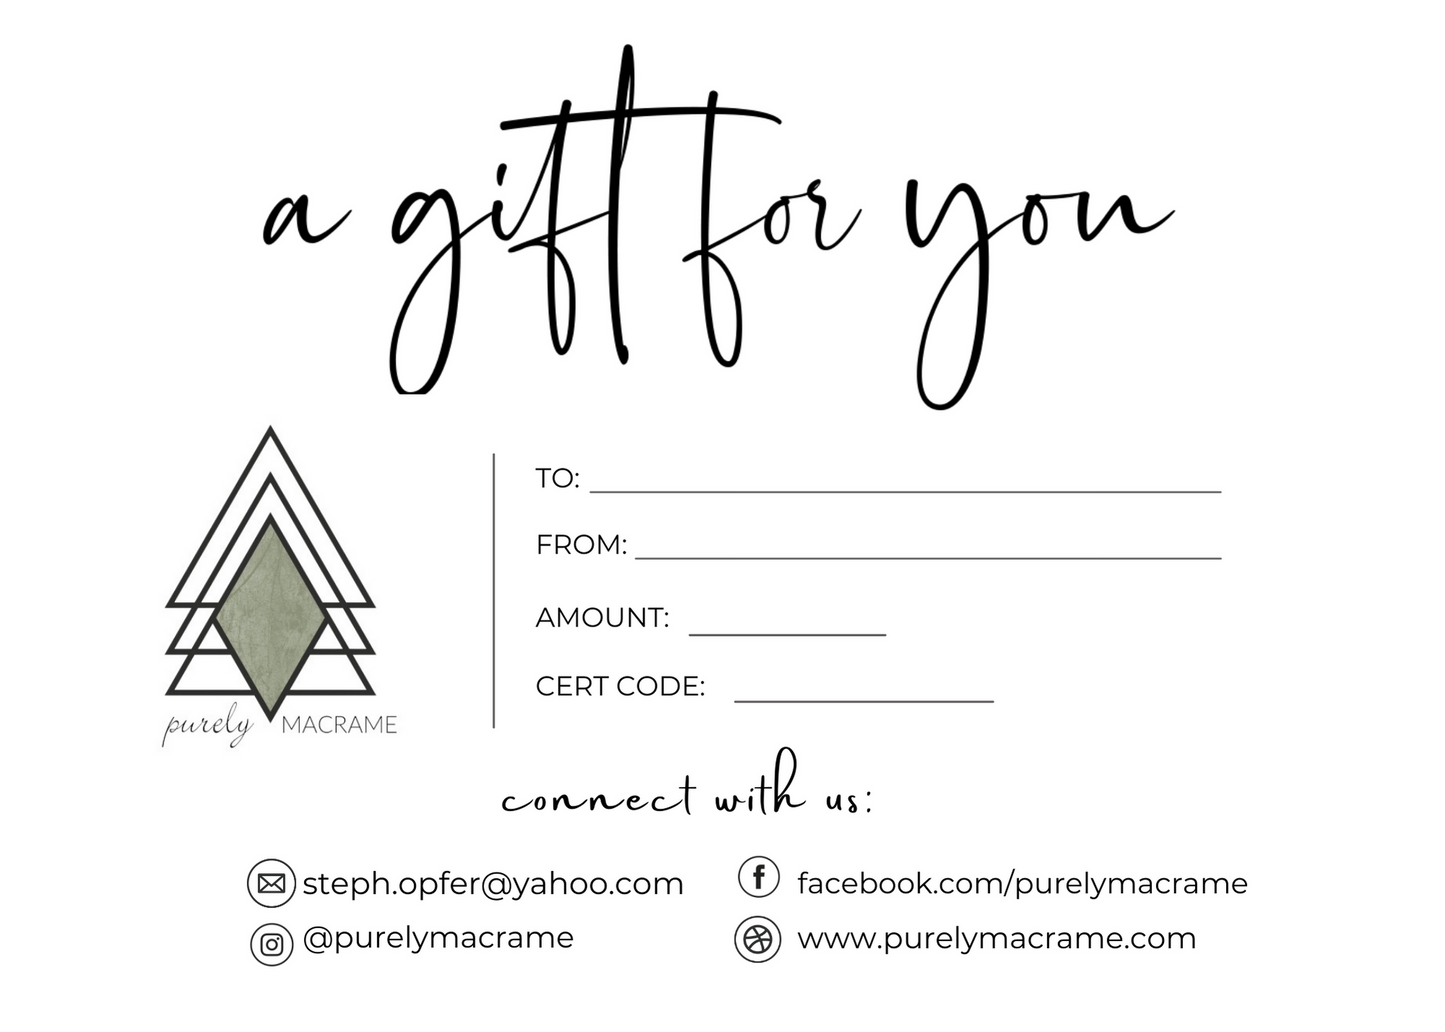 Purely Macrame Gift Certificate